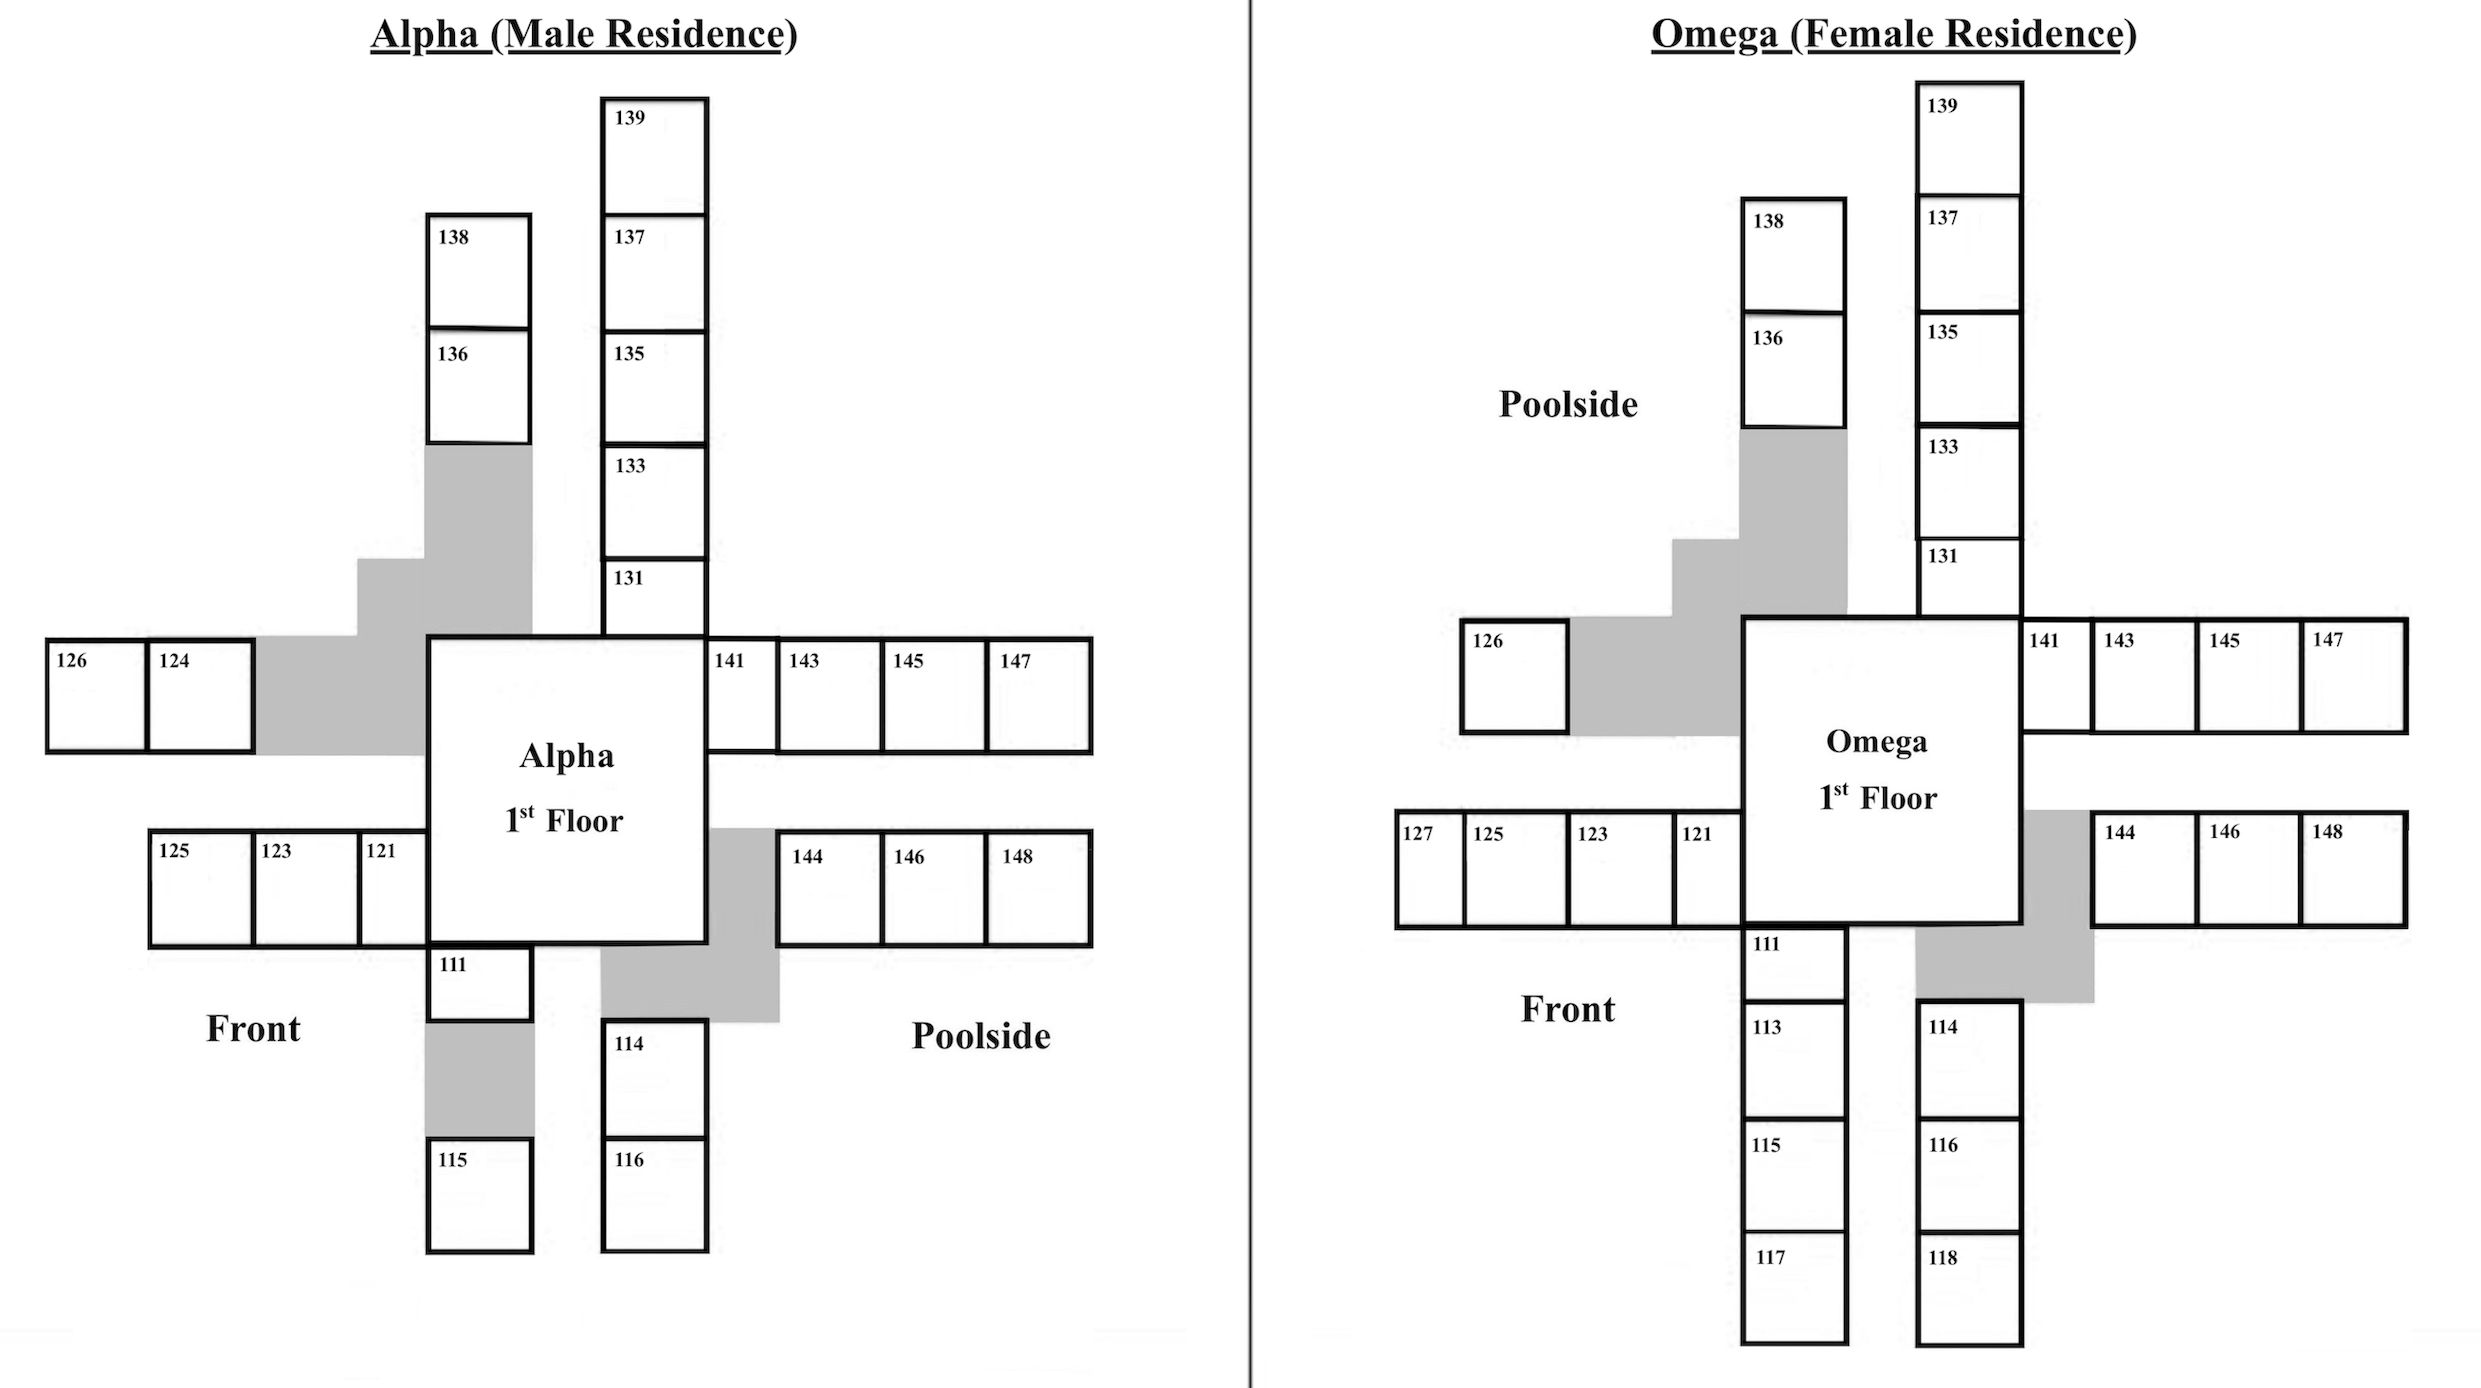 Dorm Layout for Returning Students